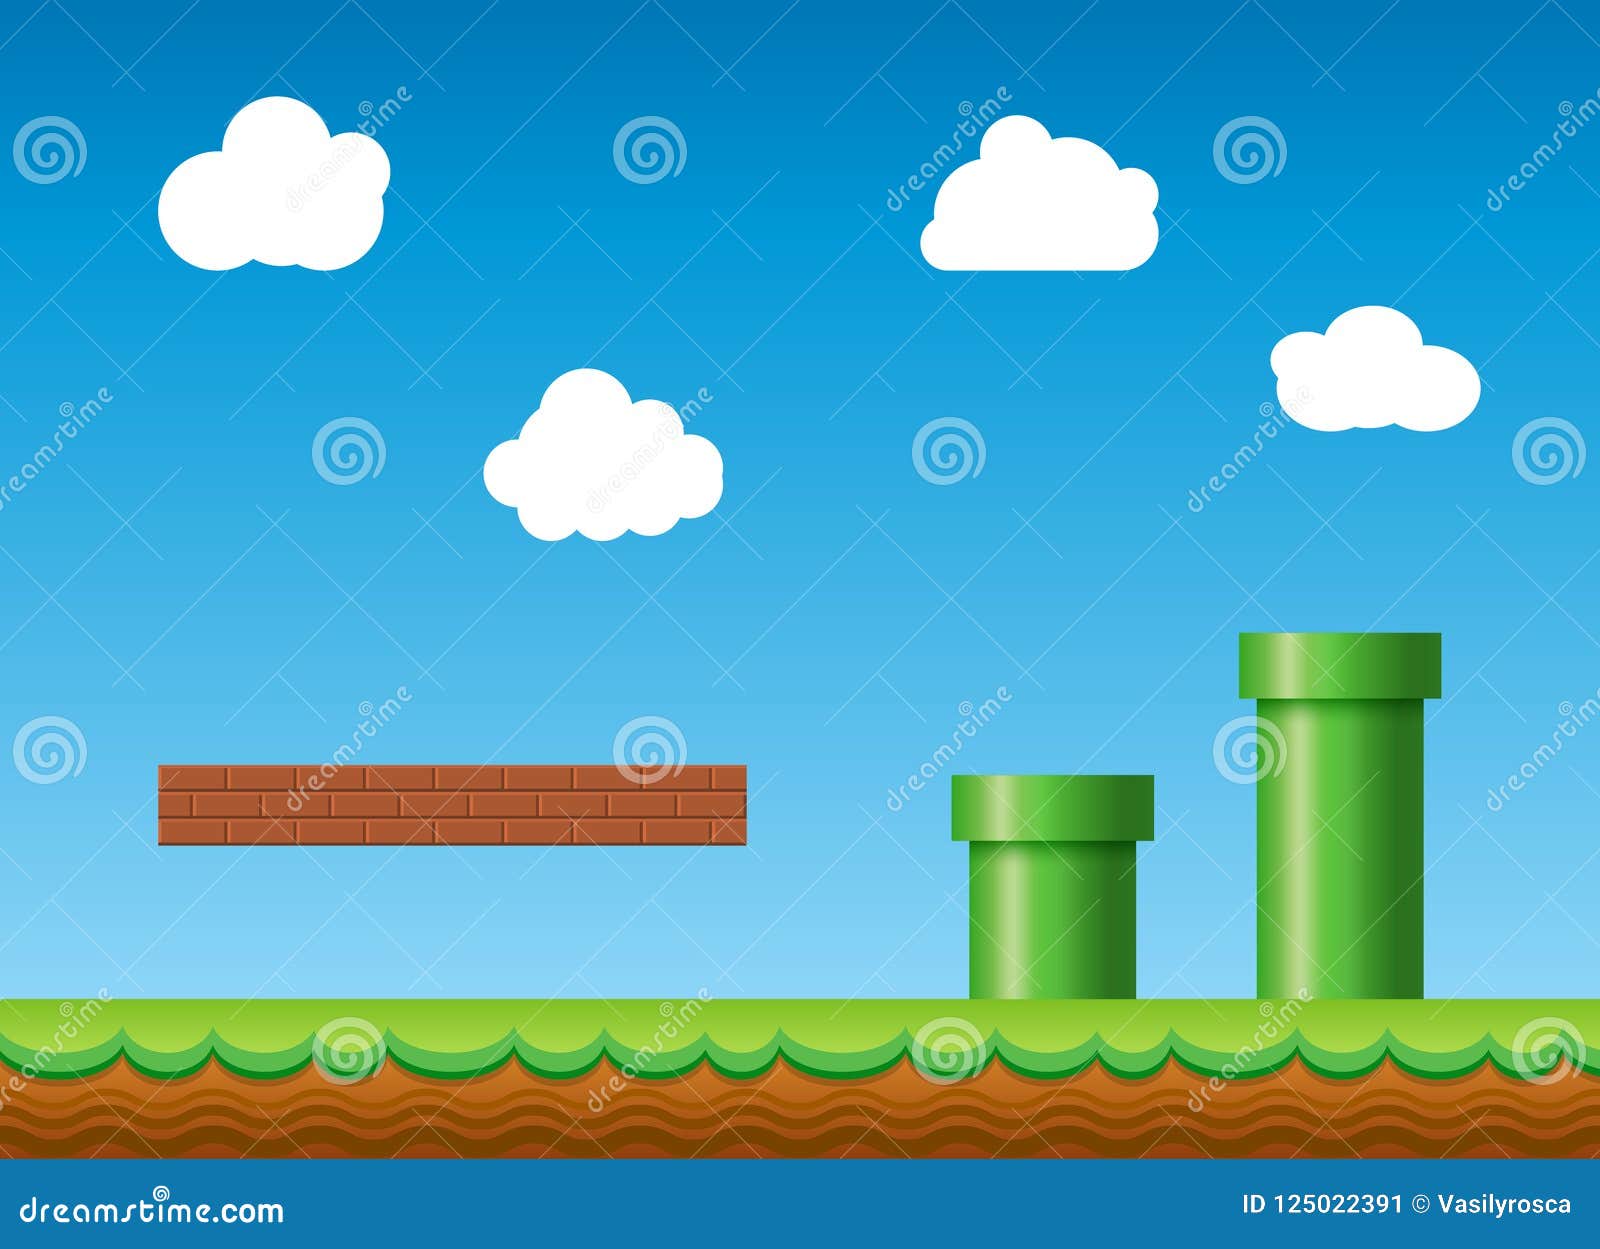 old retro video game background. classic retro style game  scenery